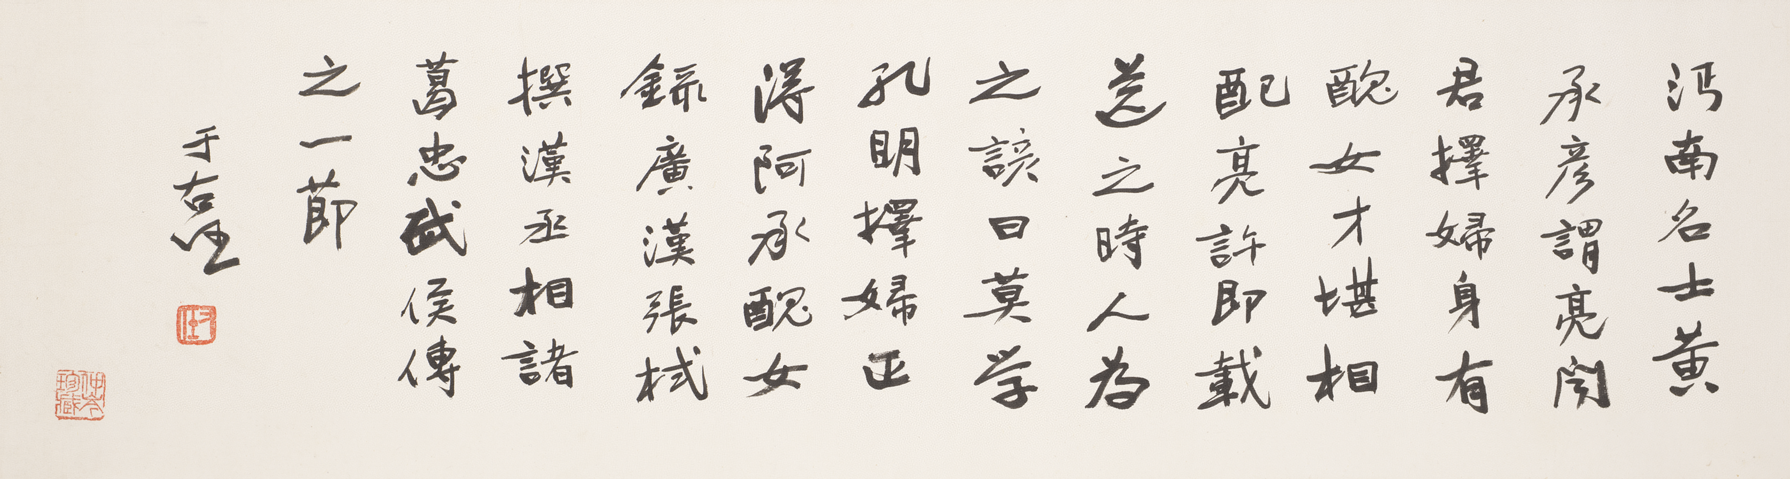 Lines from Zhuge Liang's Biography in Semi-Regular Script